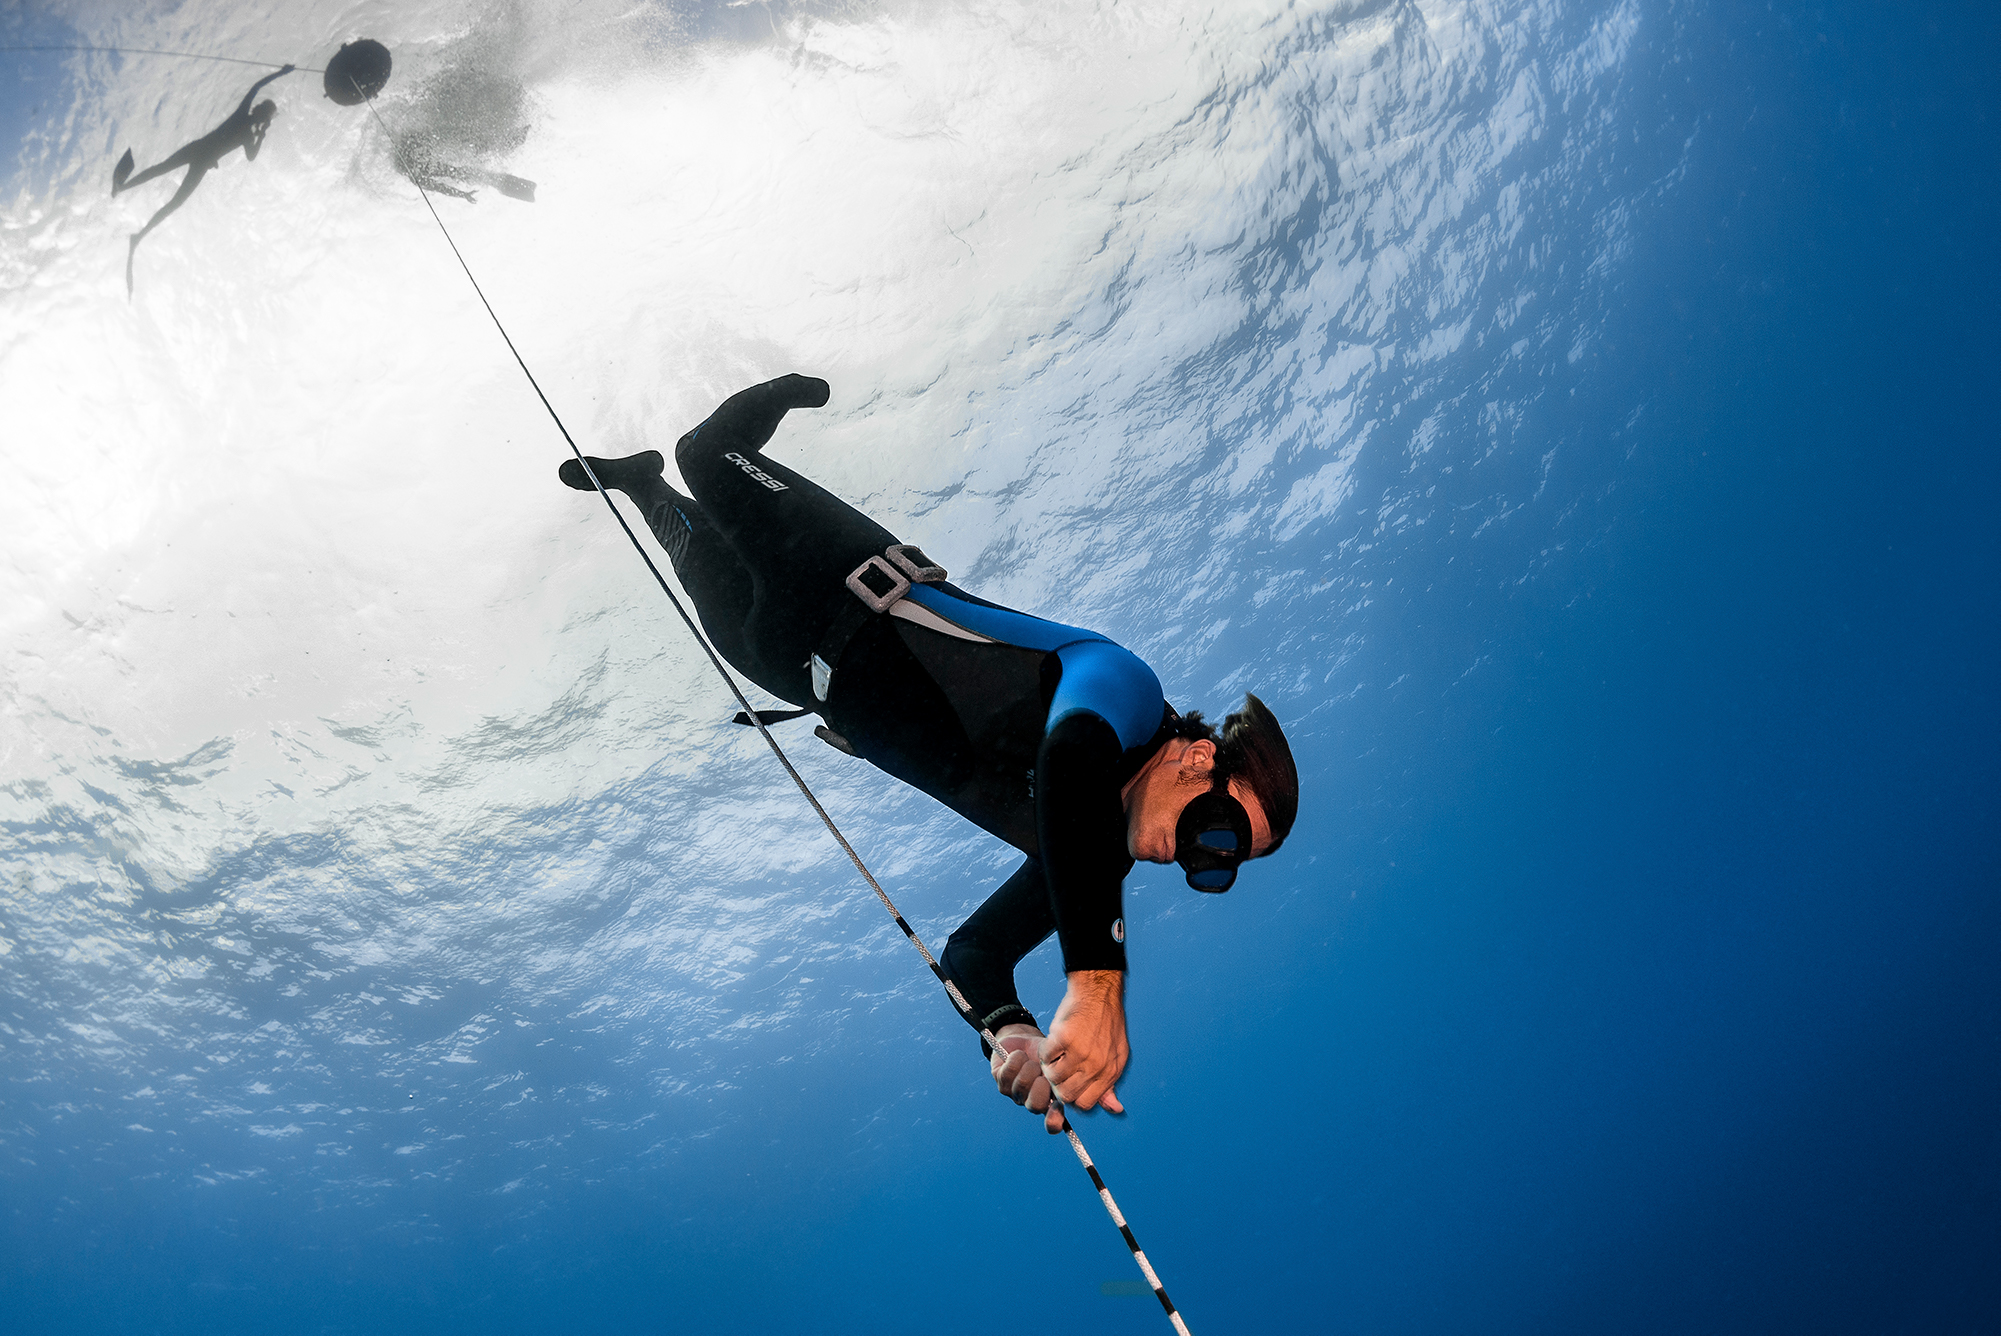 A PADI Freediver descending down a line during a free immersion dive, a popular activity at Dean's Blue Hole in The Bahamas